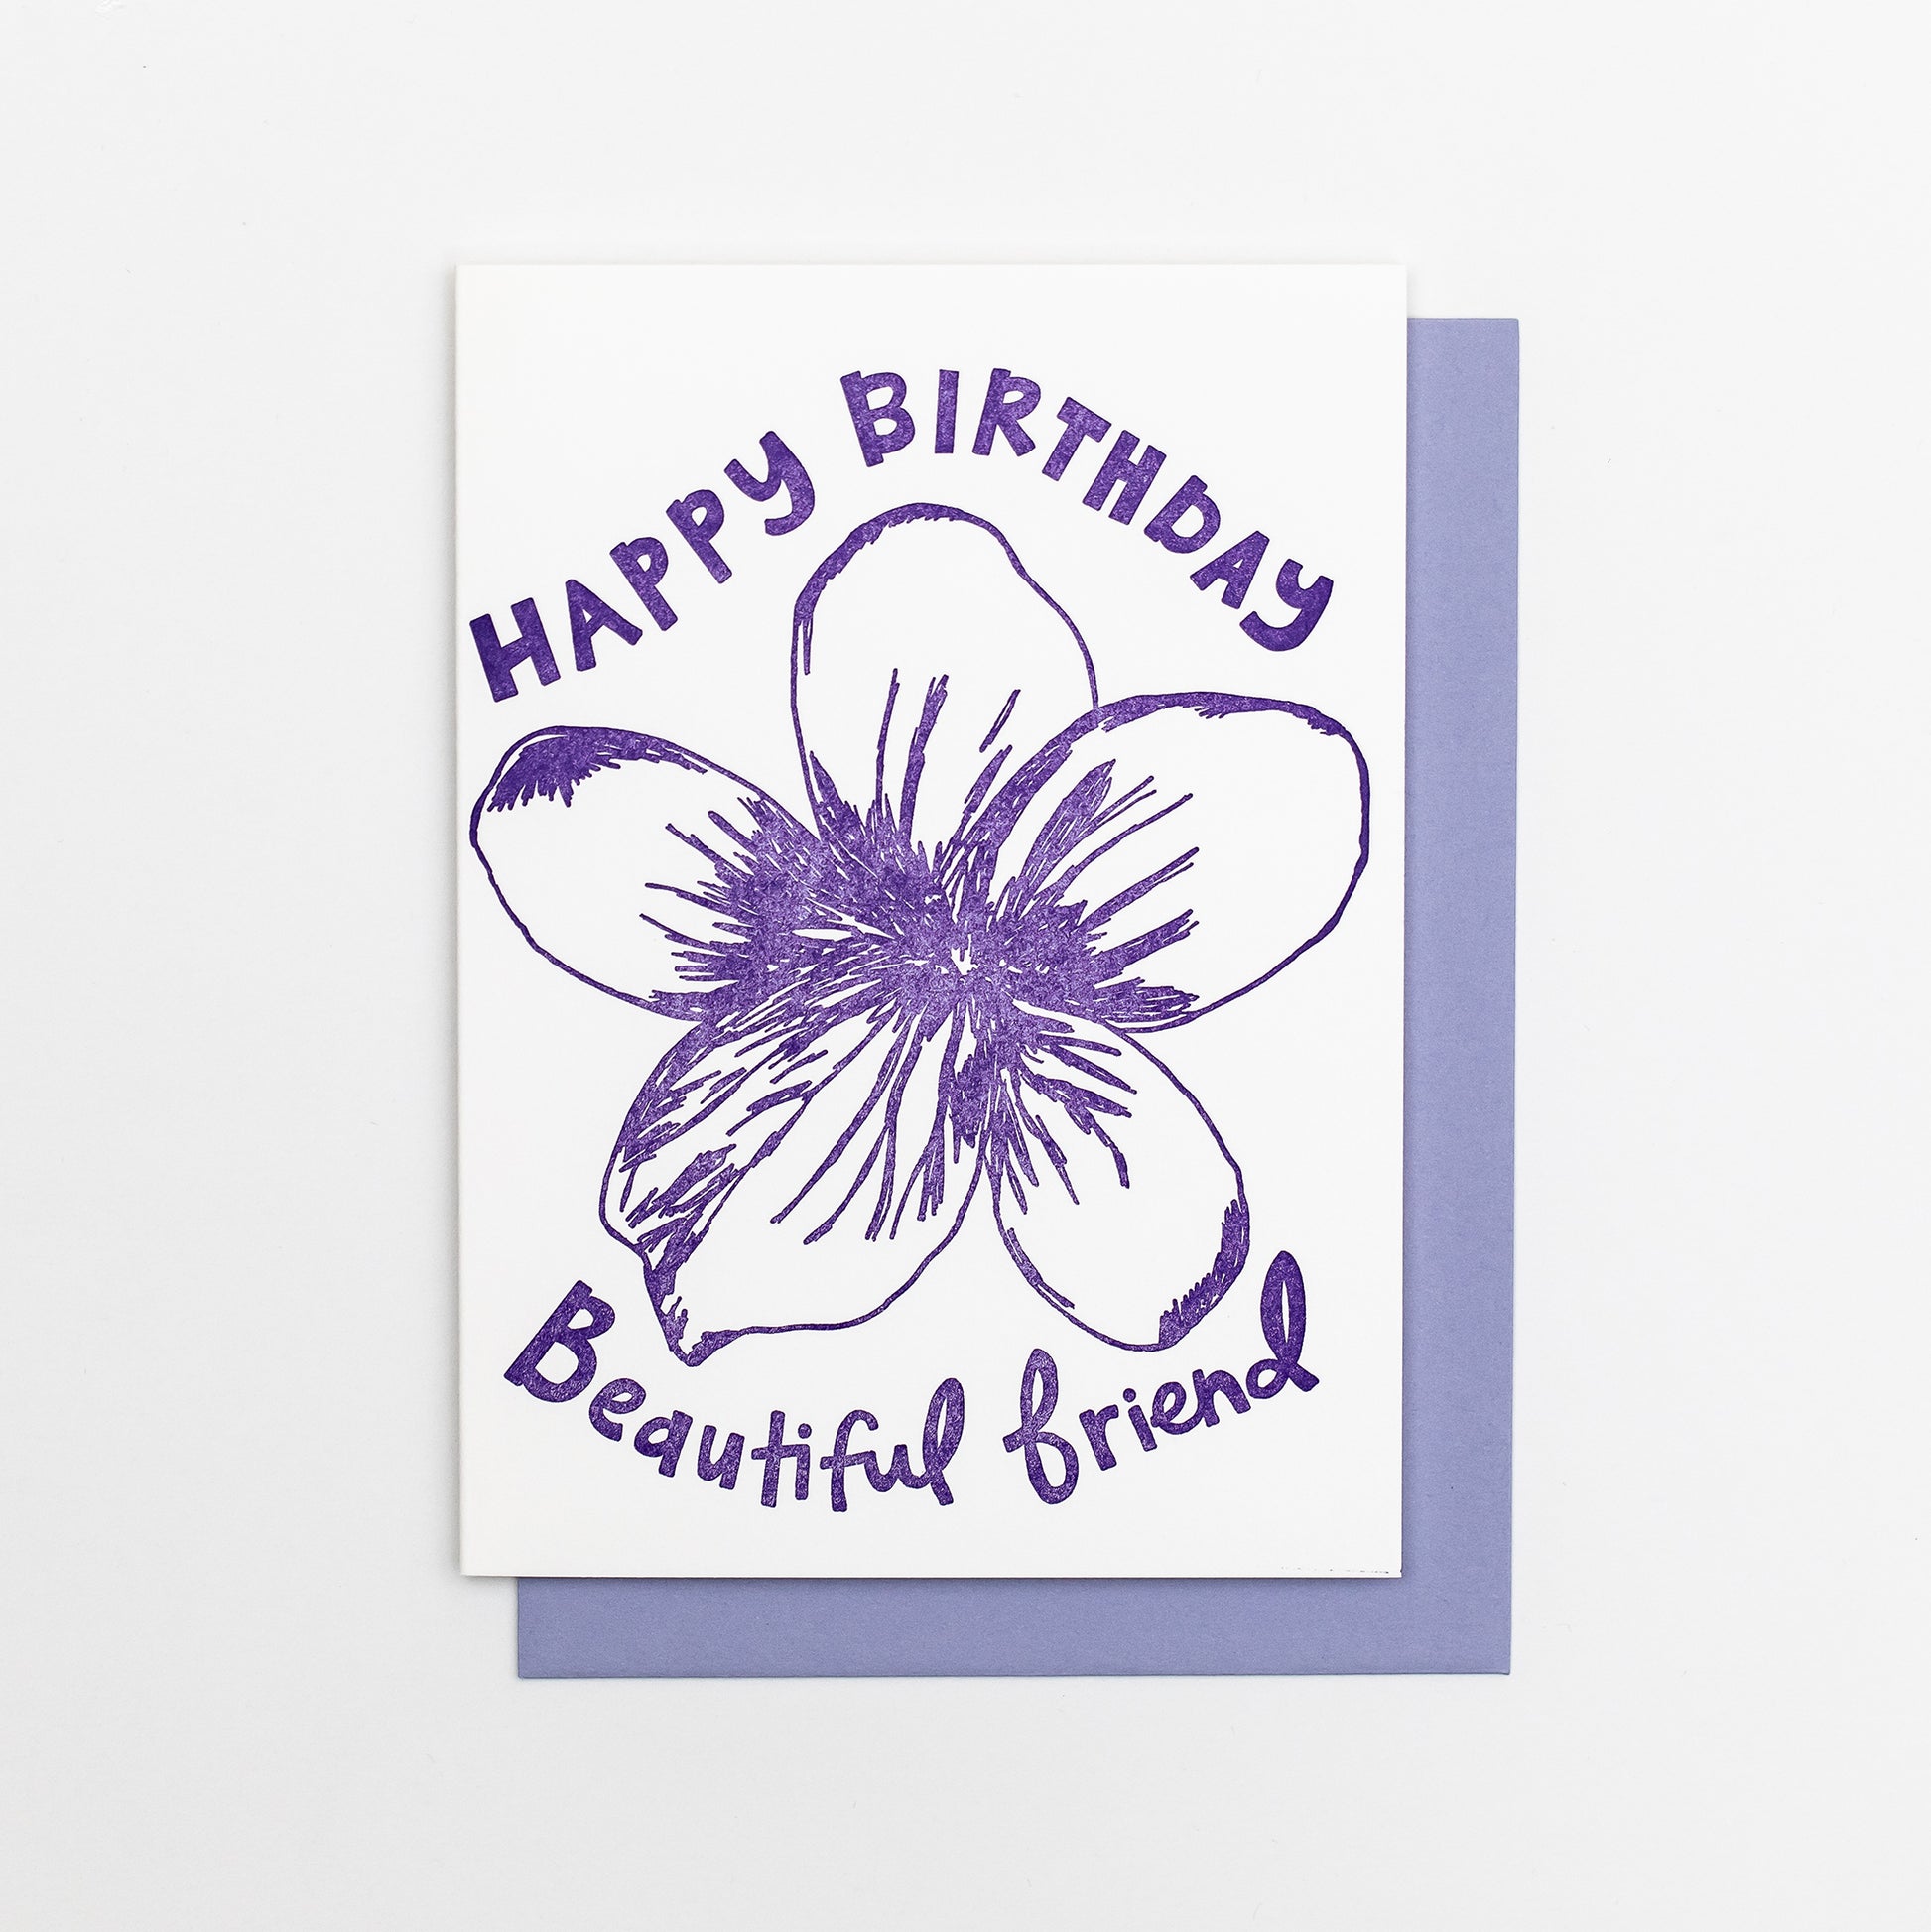 Letterpress greeting card featuring a hand-drawn Violet flower printed in a vibrant purple ink. "Happy Birthday Beautiful Friend!" is written on the top and bottom of the flower in a whimsical hand-drawn text, in the same purple ink. The card is white, blank inside, and is paired with a lilac purple envelope.